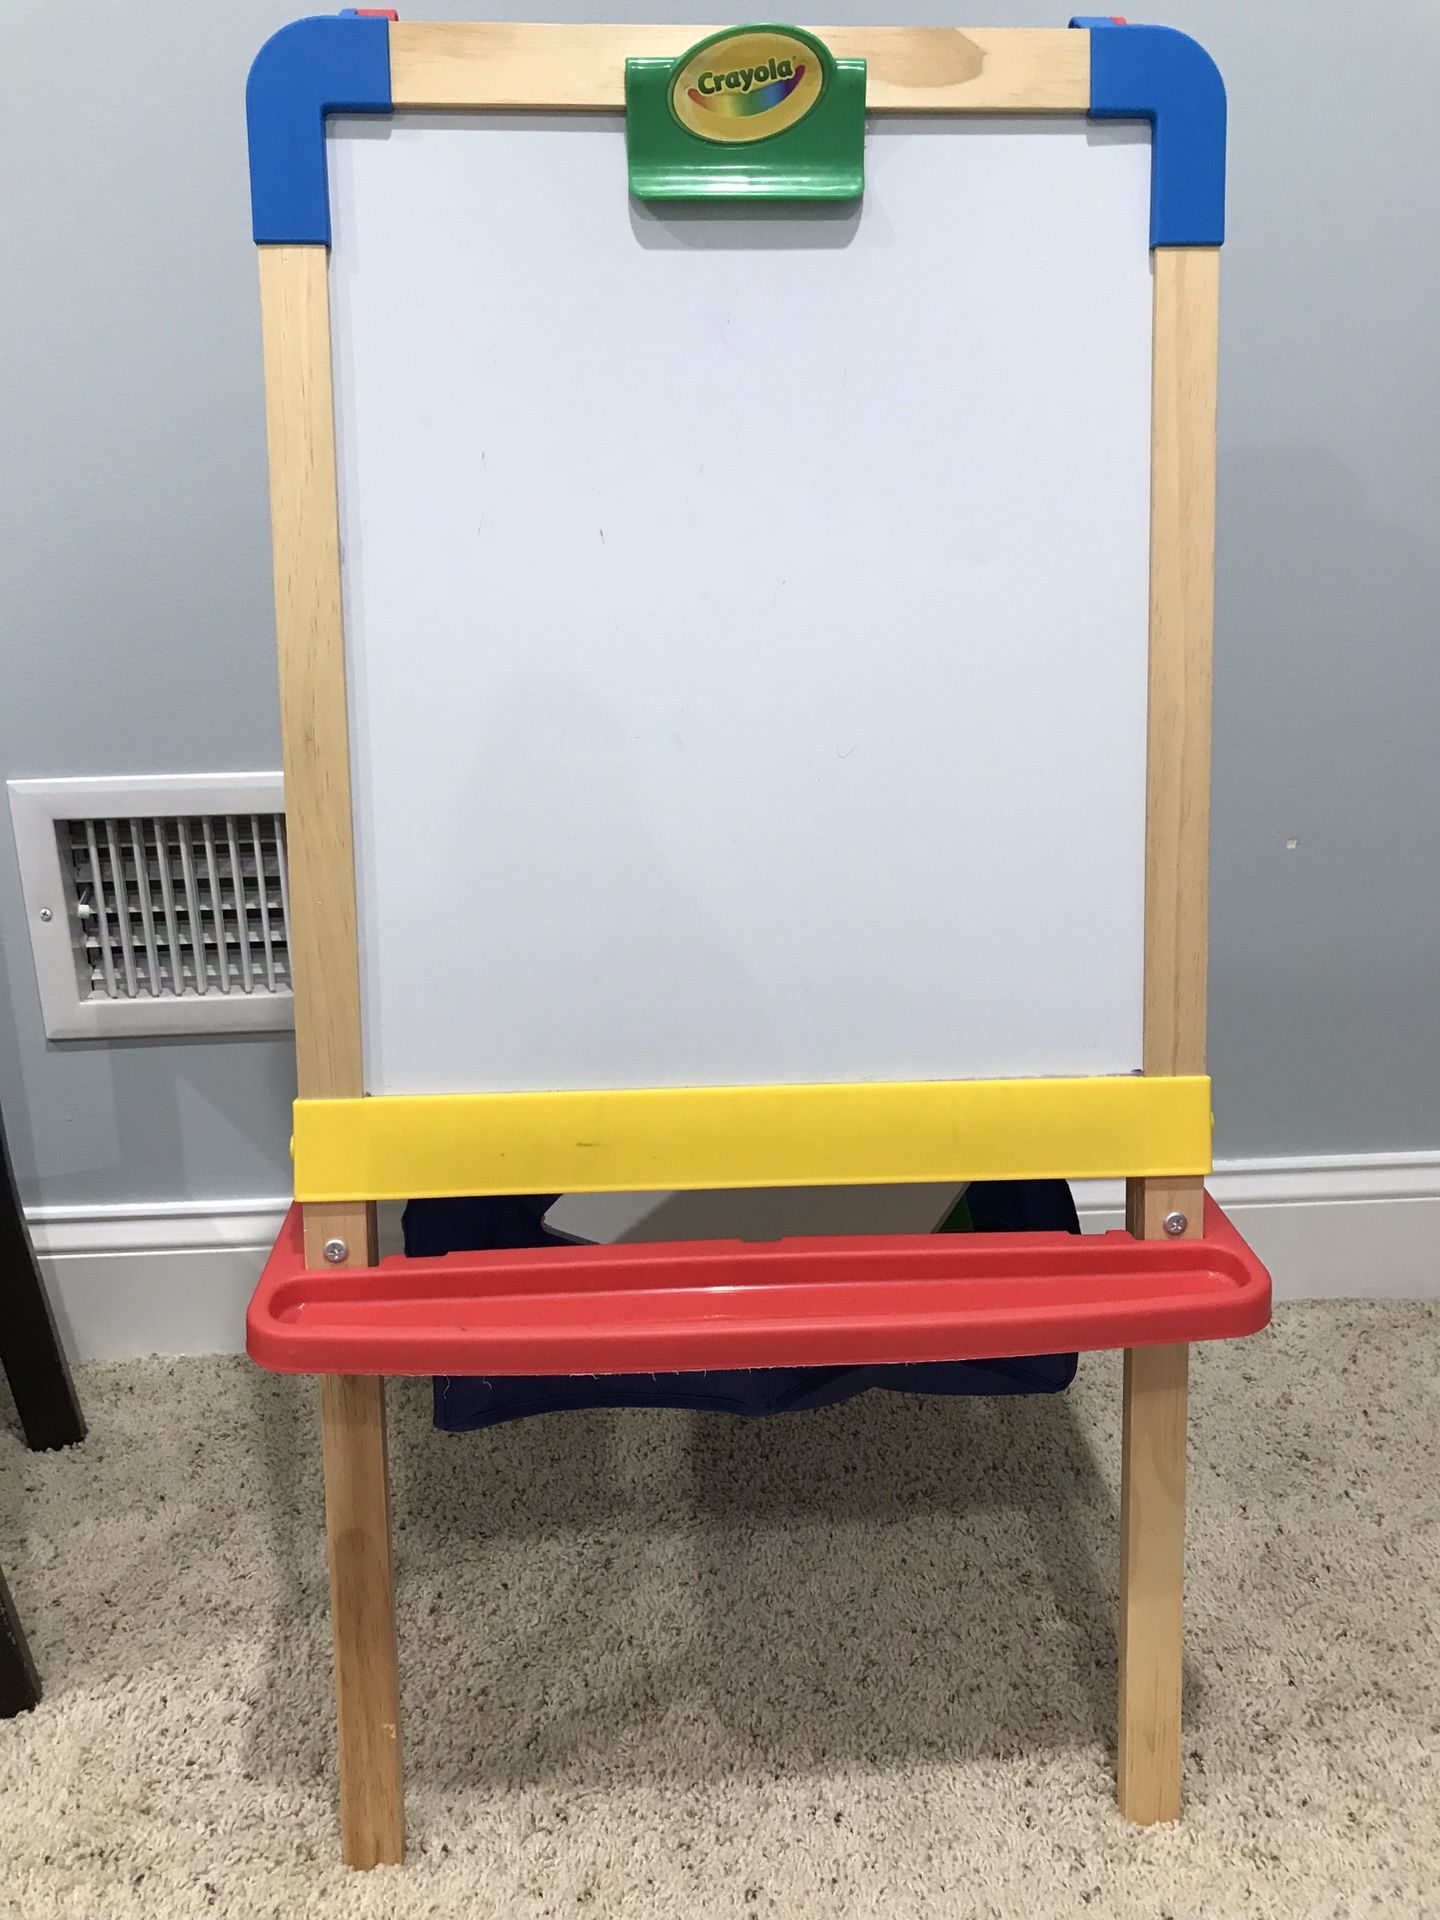 Crayola wooden easel magnetic 2 sided